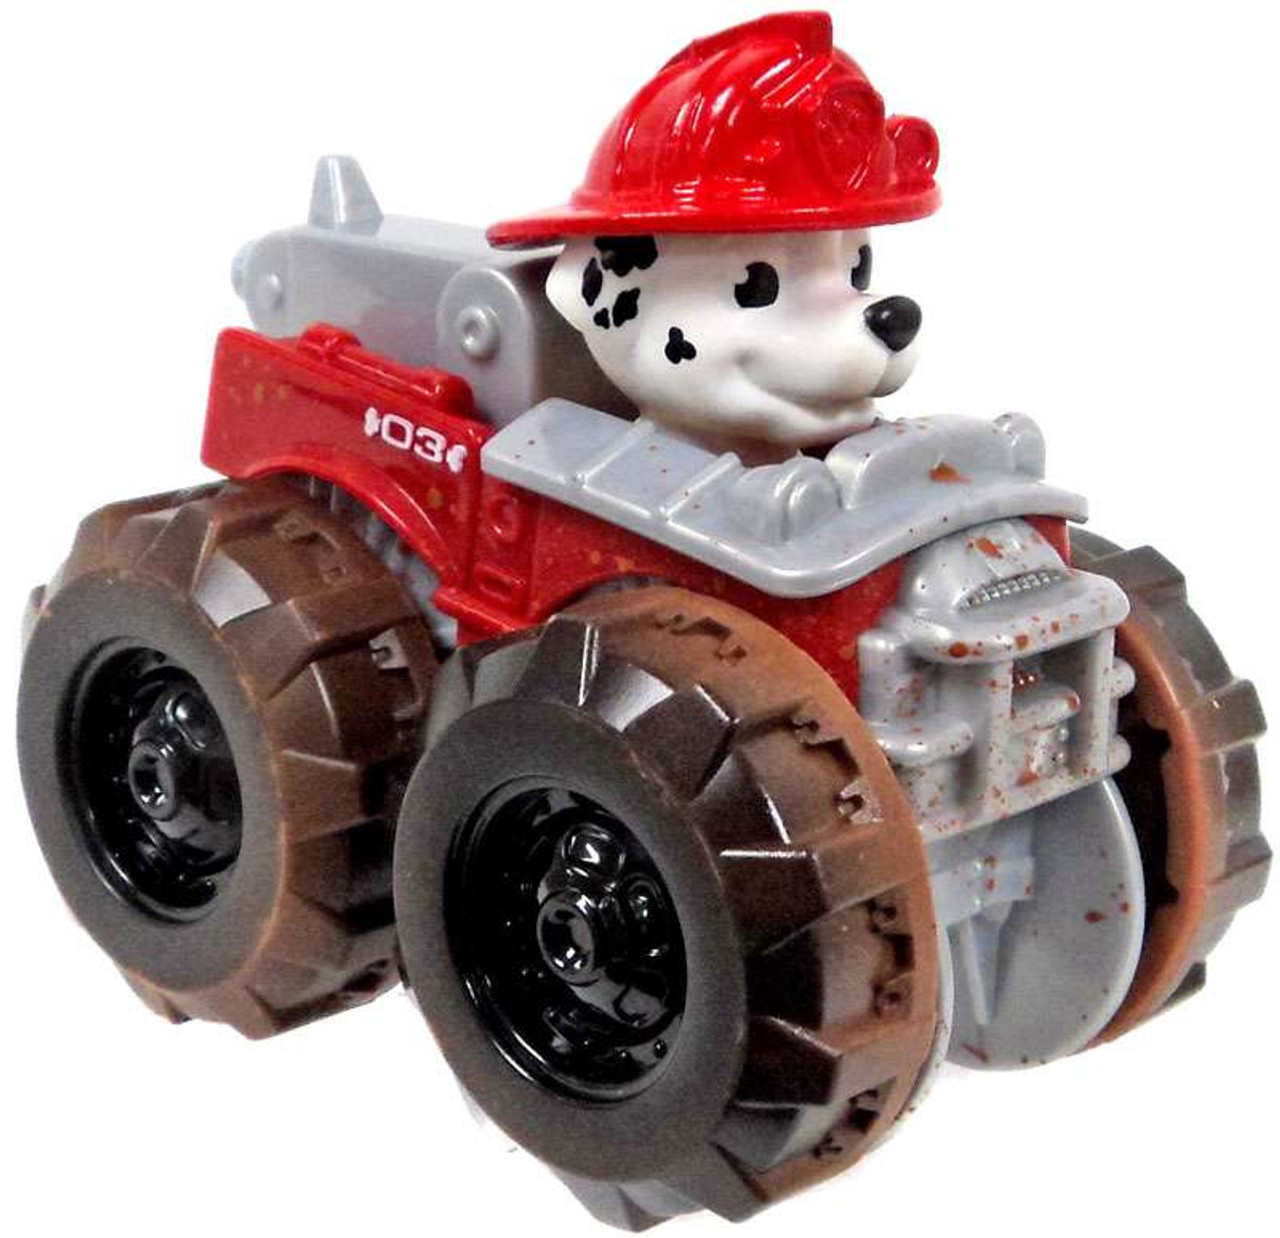 Paw Patrol Marshalls Monster Truck Figure Does Not Come Out Spin Master - ToyWiz